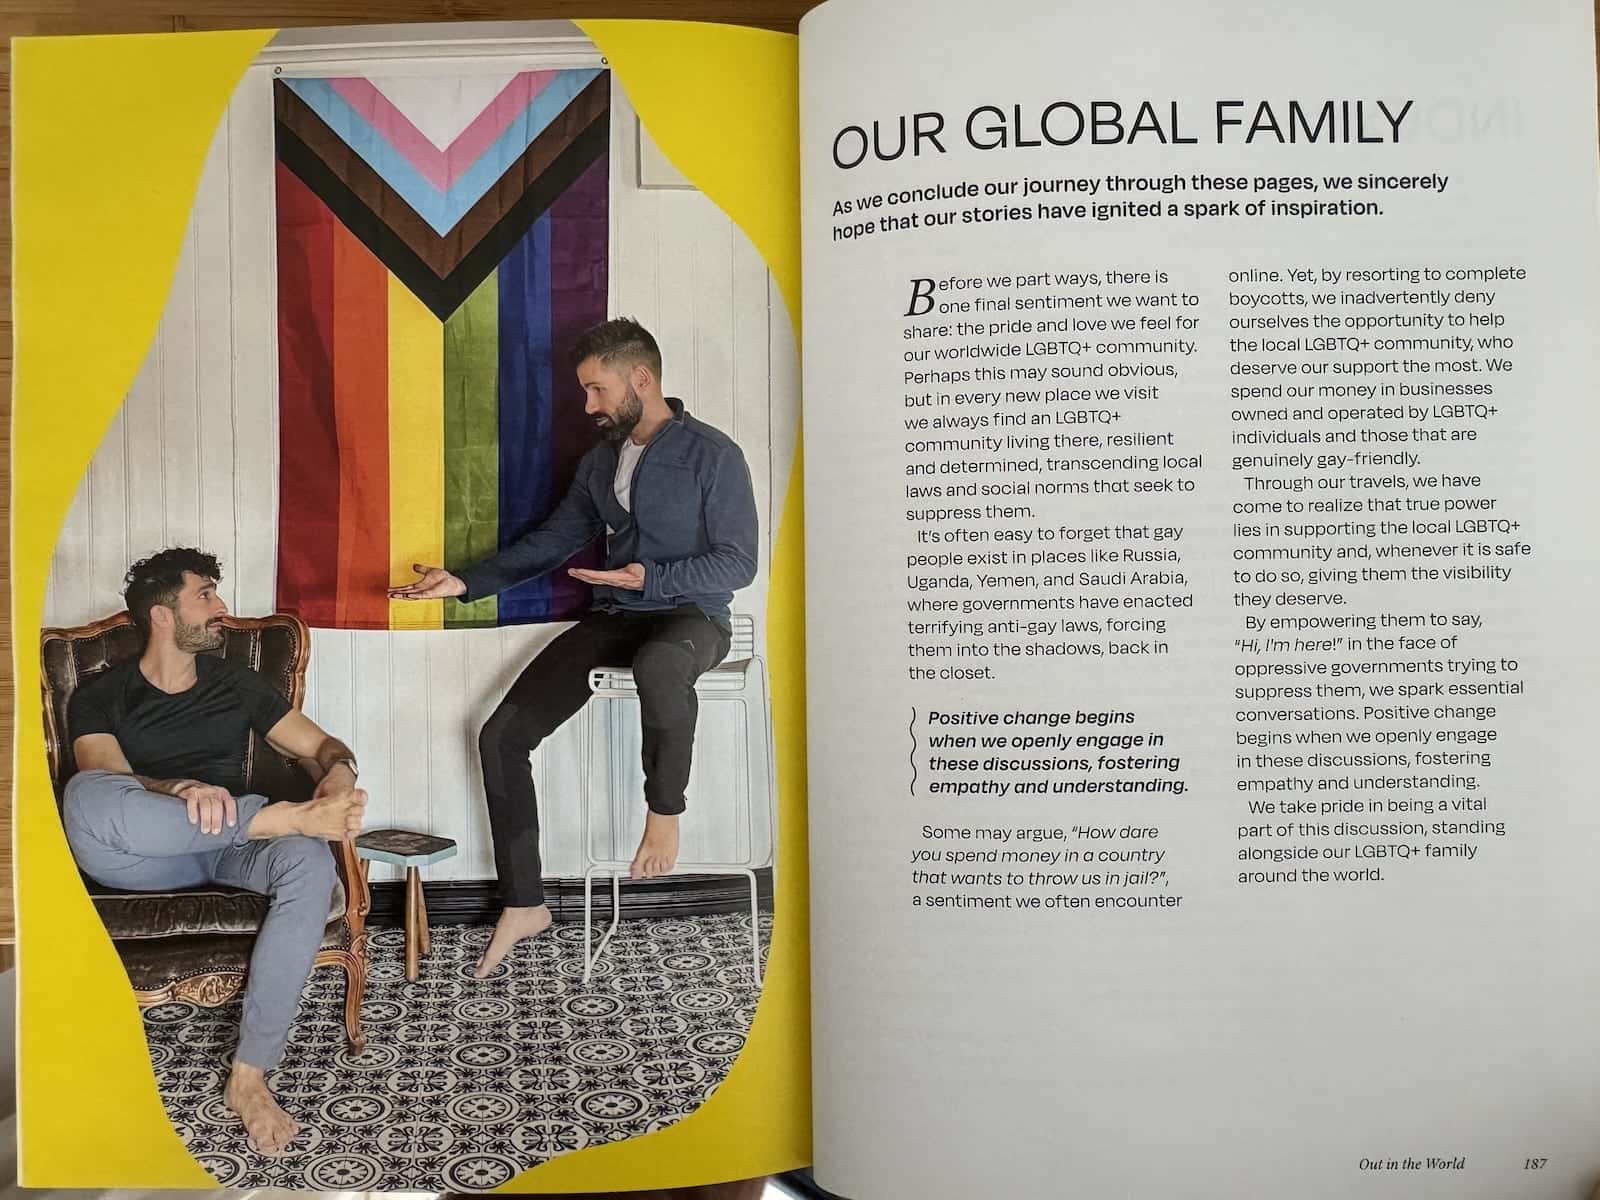 The conclusion of our gay travel book devoted to our global LGBTQ+ family.